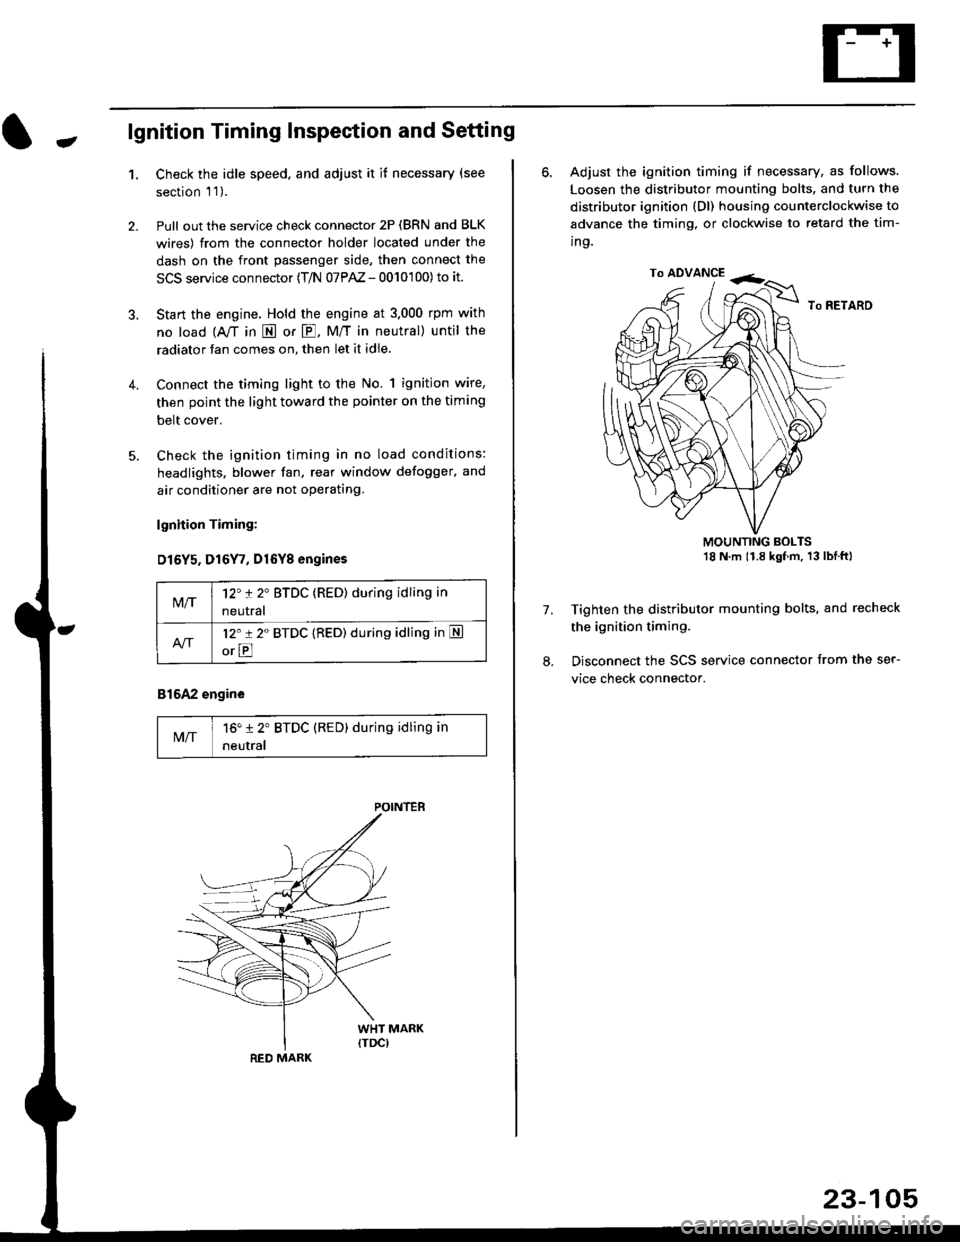 HONDA CIVIC 2000 6.G Owners Manual -lgnition Timing Inspection and Setting
1.Check the idle speed, and adjust it it necessary (see
section l 1 ).
Pull out the service check connector 2P (BRN and BLK
wires) from the connector holder l